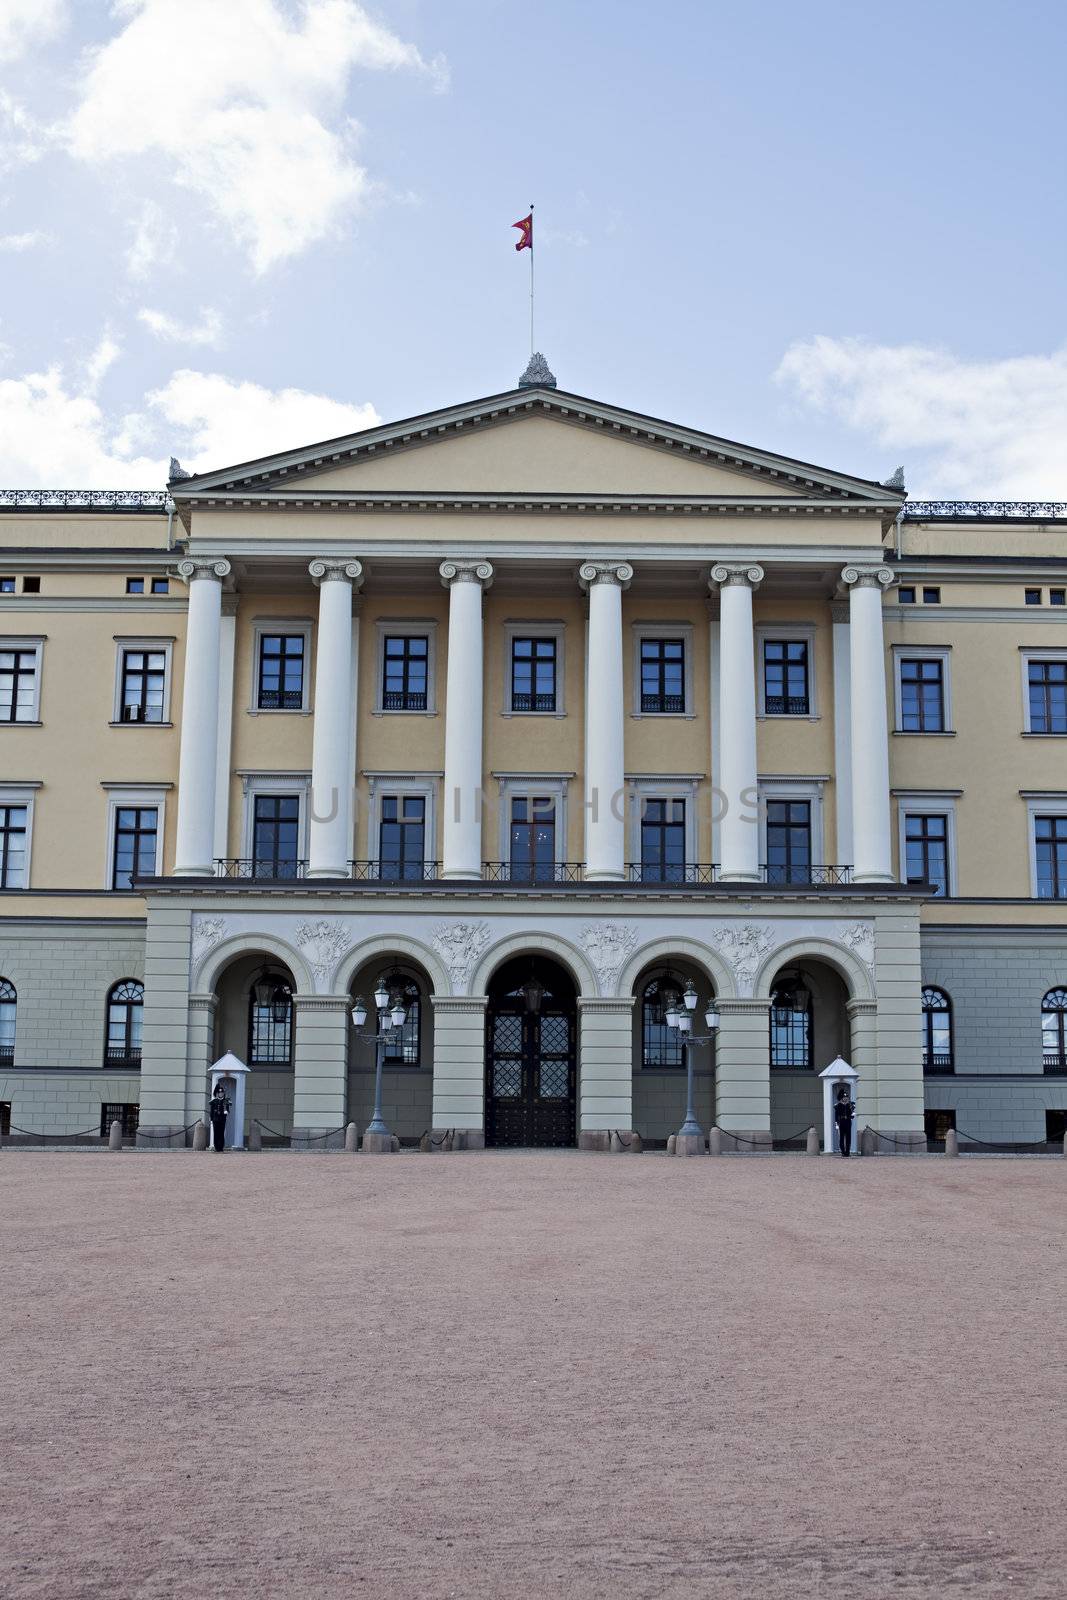 royal palace in oslo,norway